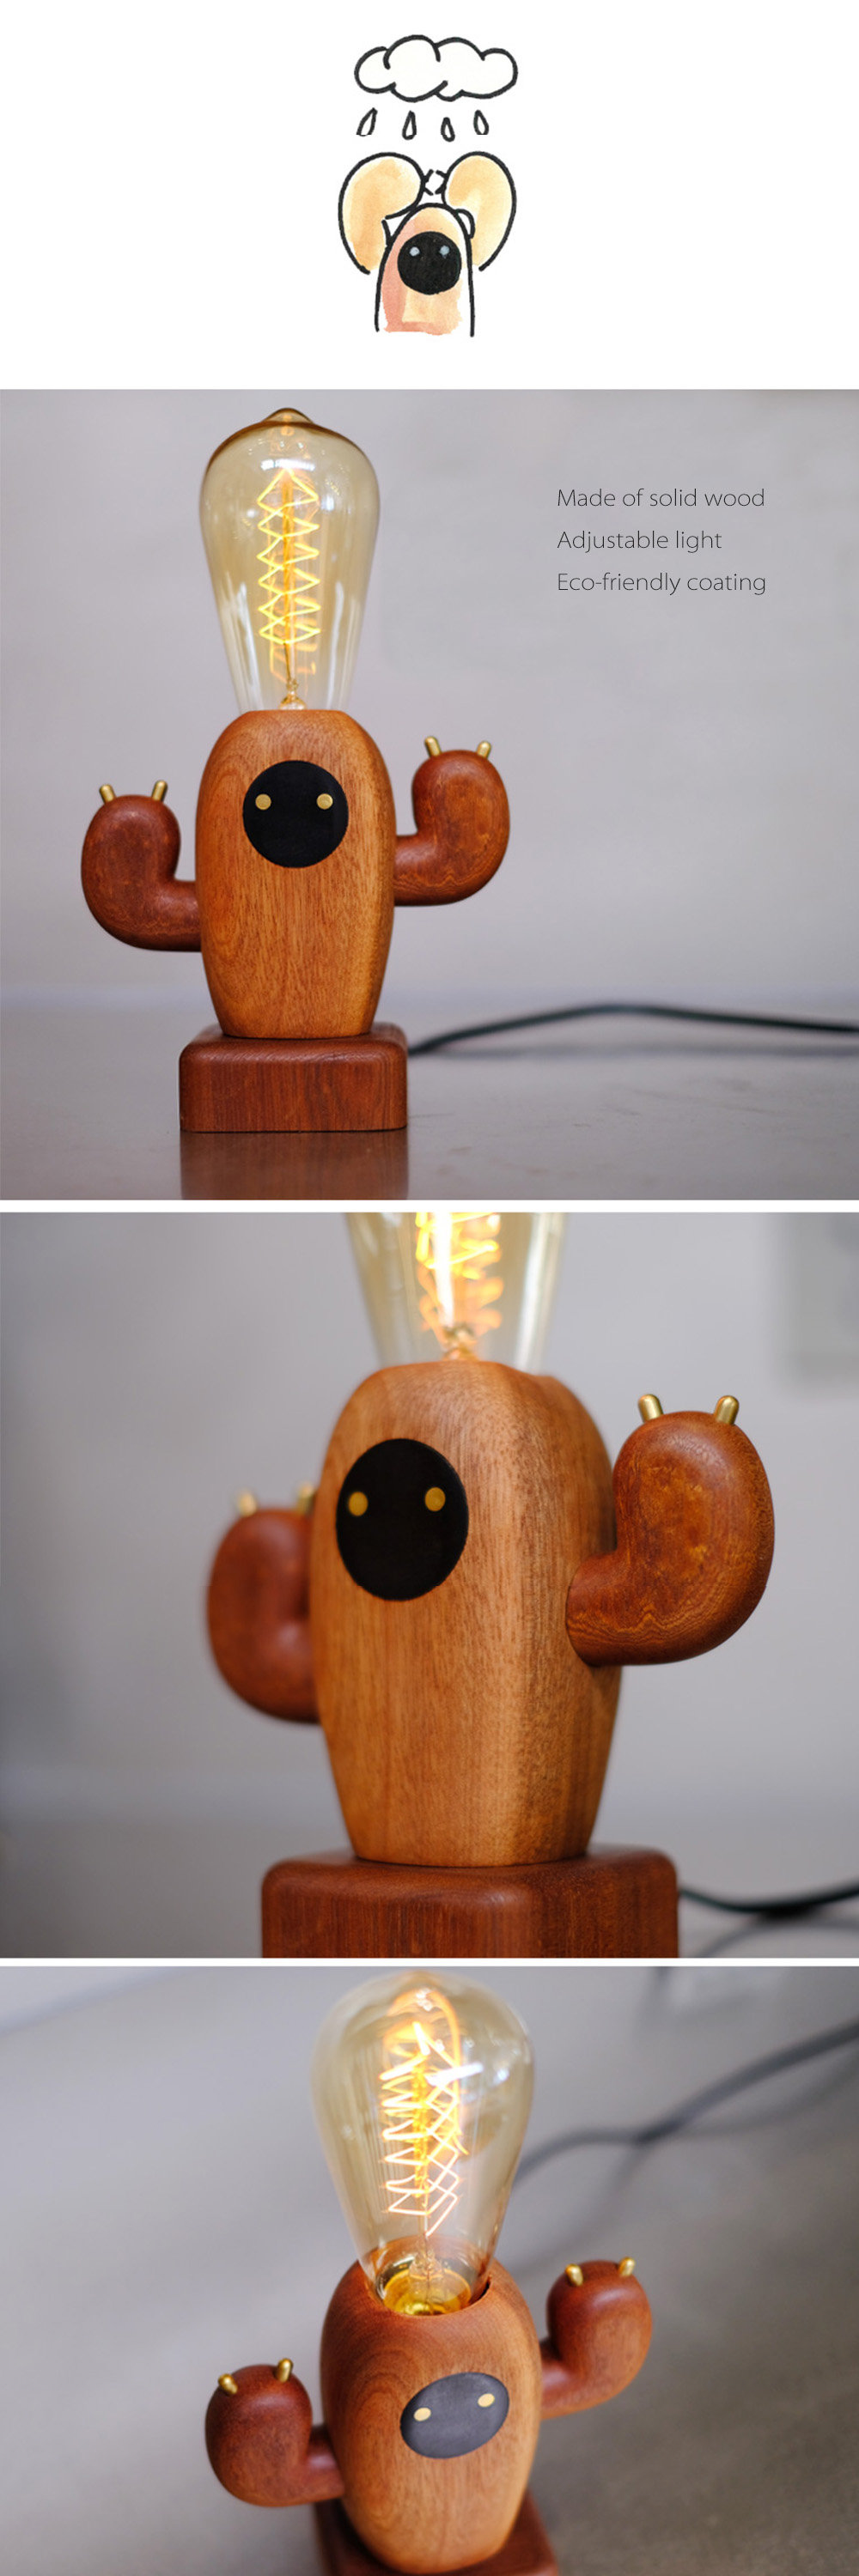 Wooden Cactus Lamp Cute and Functional